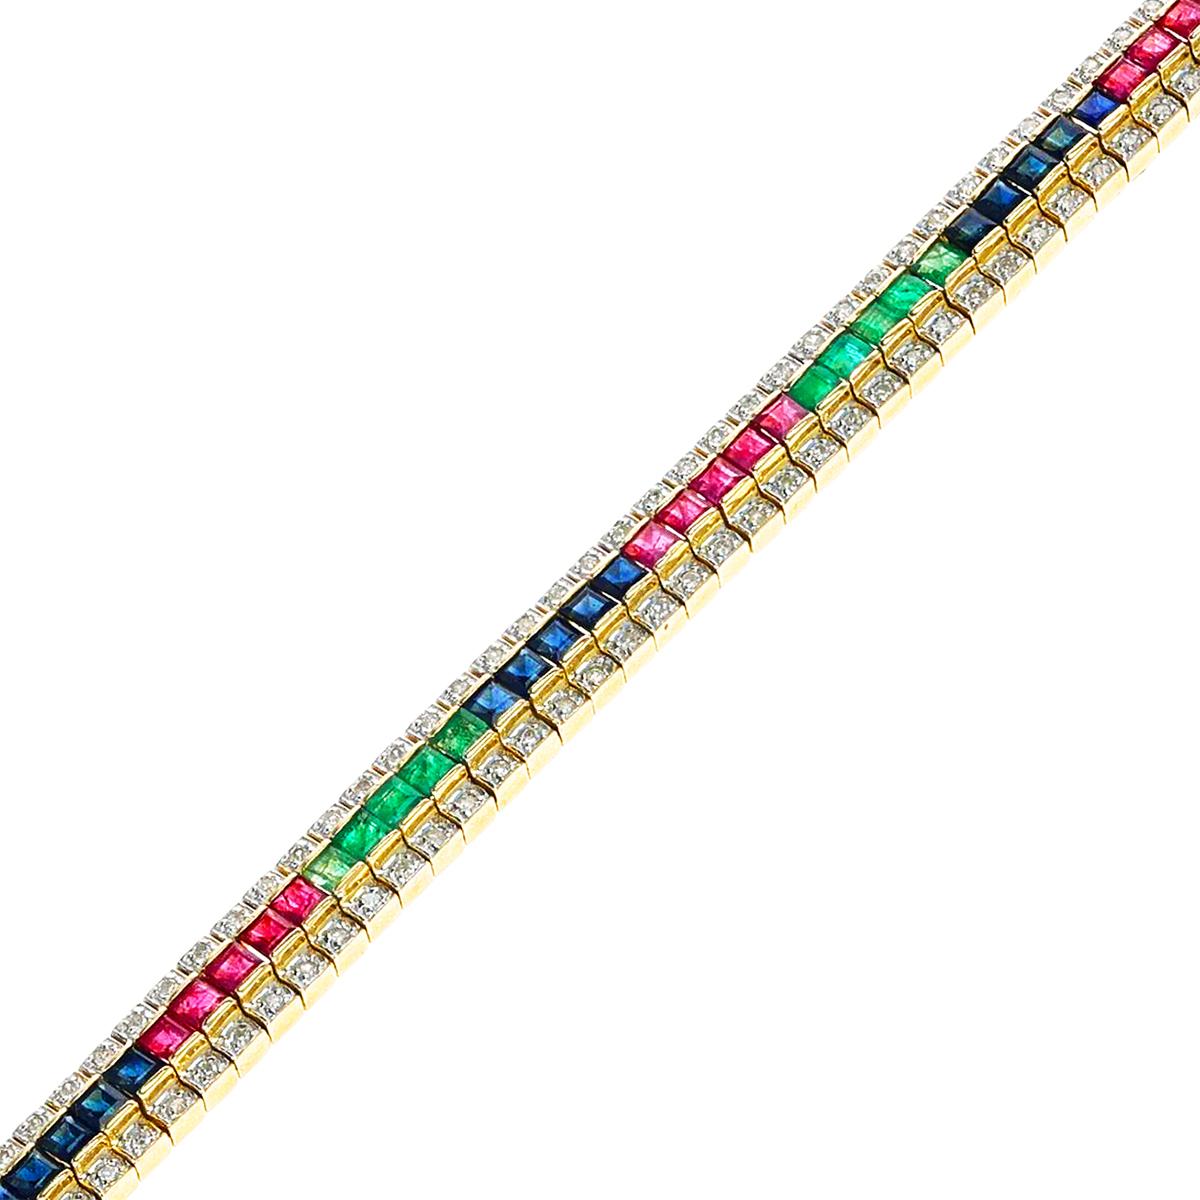 A Ruby, Emerald, Sapphire and Diamond Bracelet made in 14k Yellow Gold. The length of the bracelet is 7.25 inches. The total weight of the bracelet is 24.63 grams. 